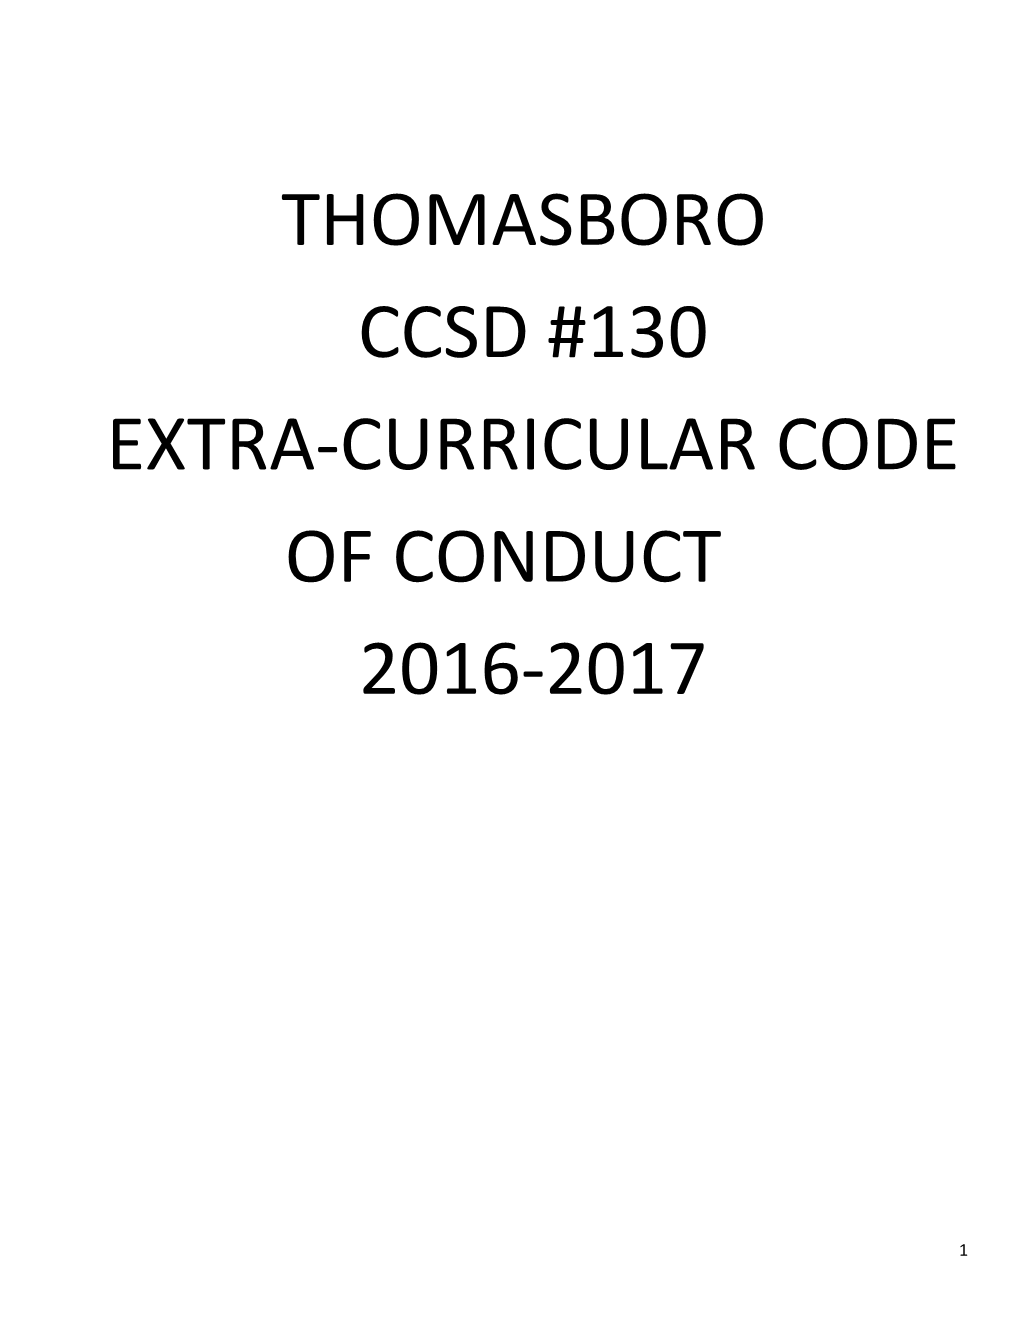 The Extra-Curricular Code of Conduct for Sports and Activities Pertains to the Following